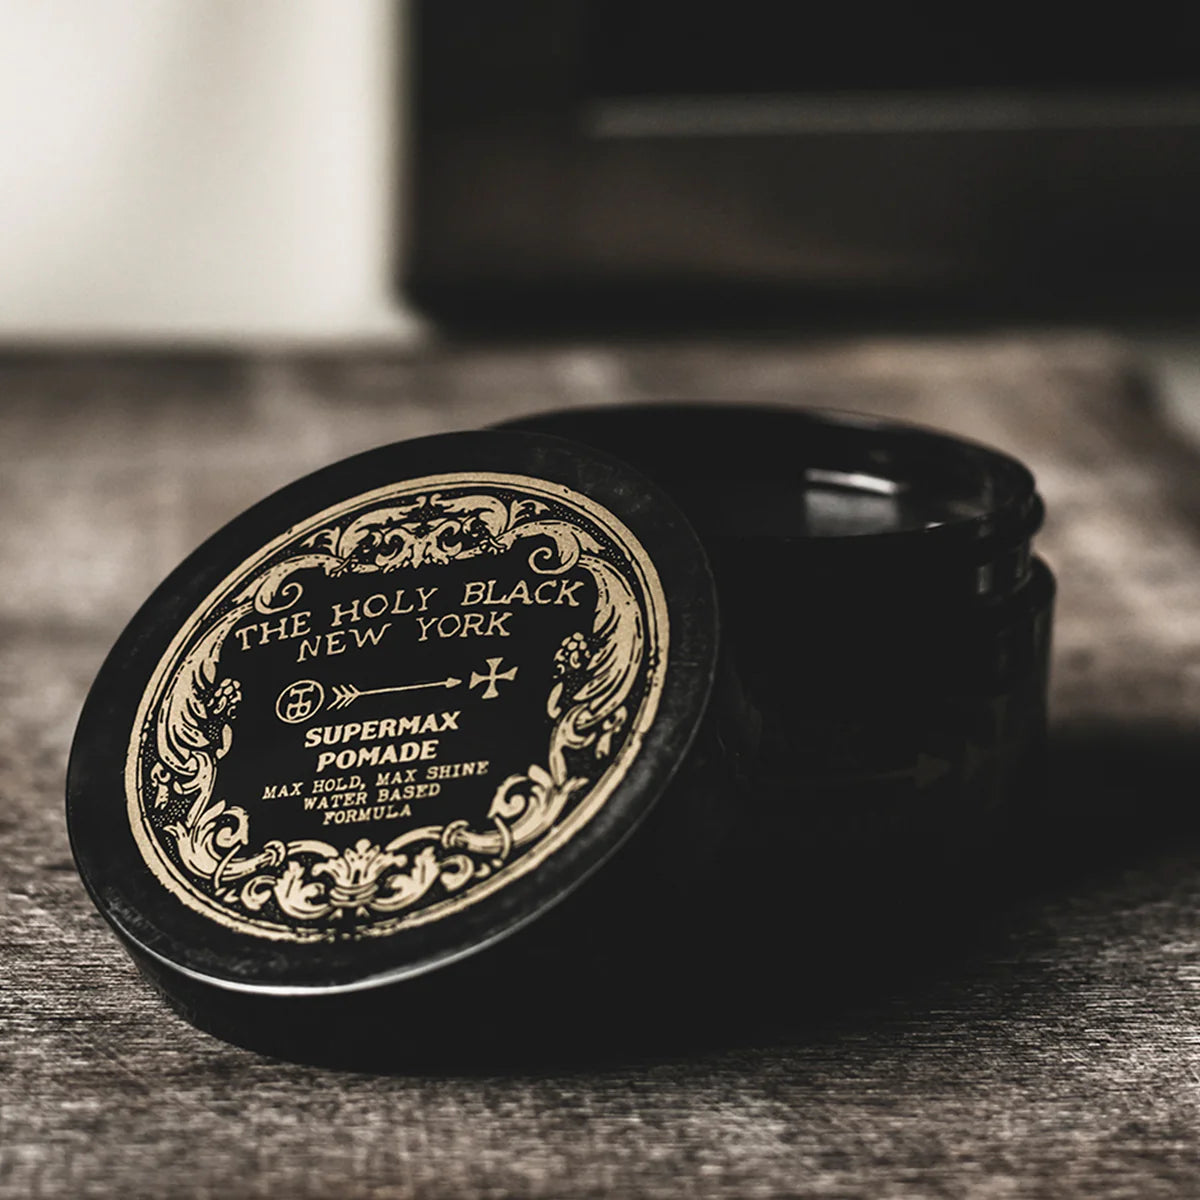 The Holy Black Supermax Pomade